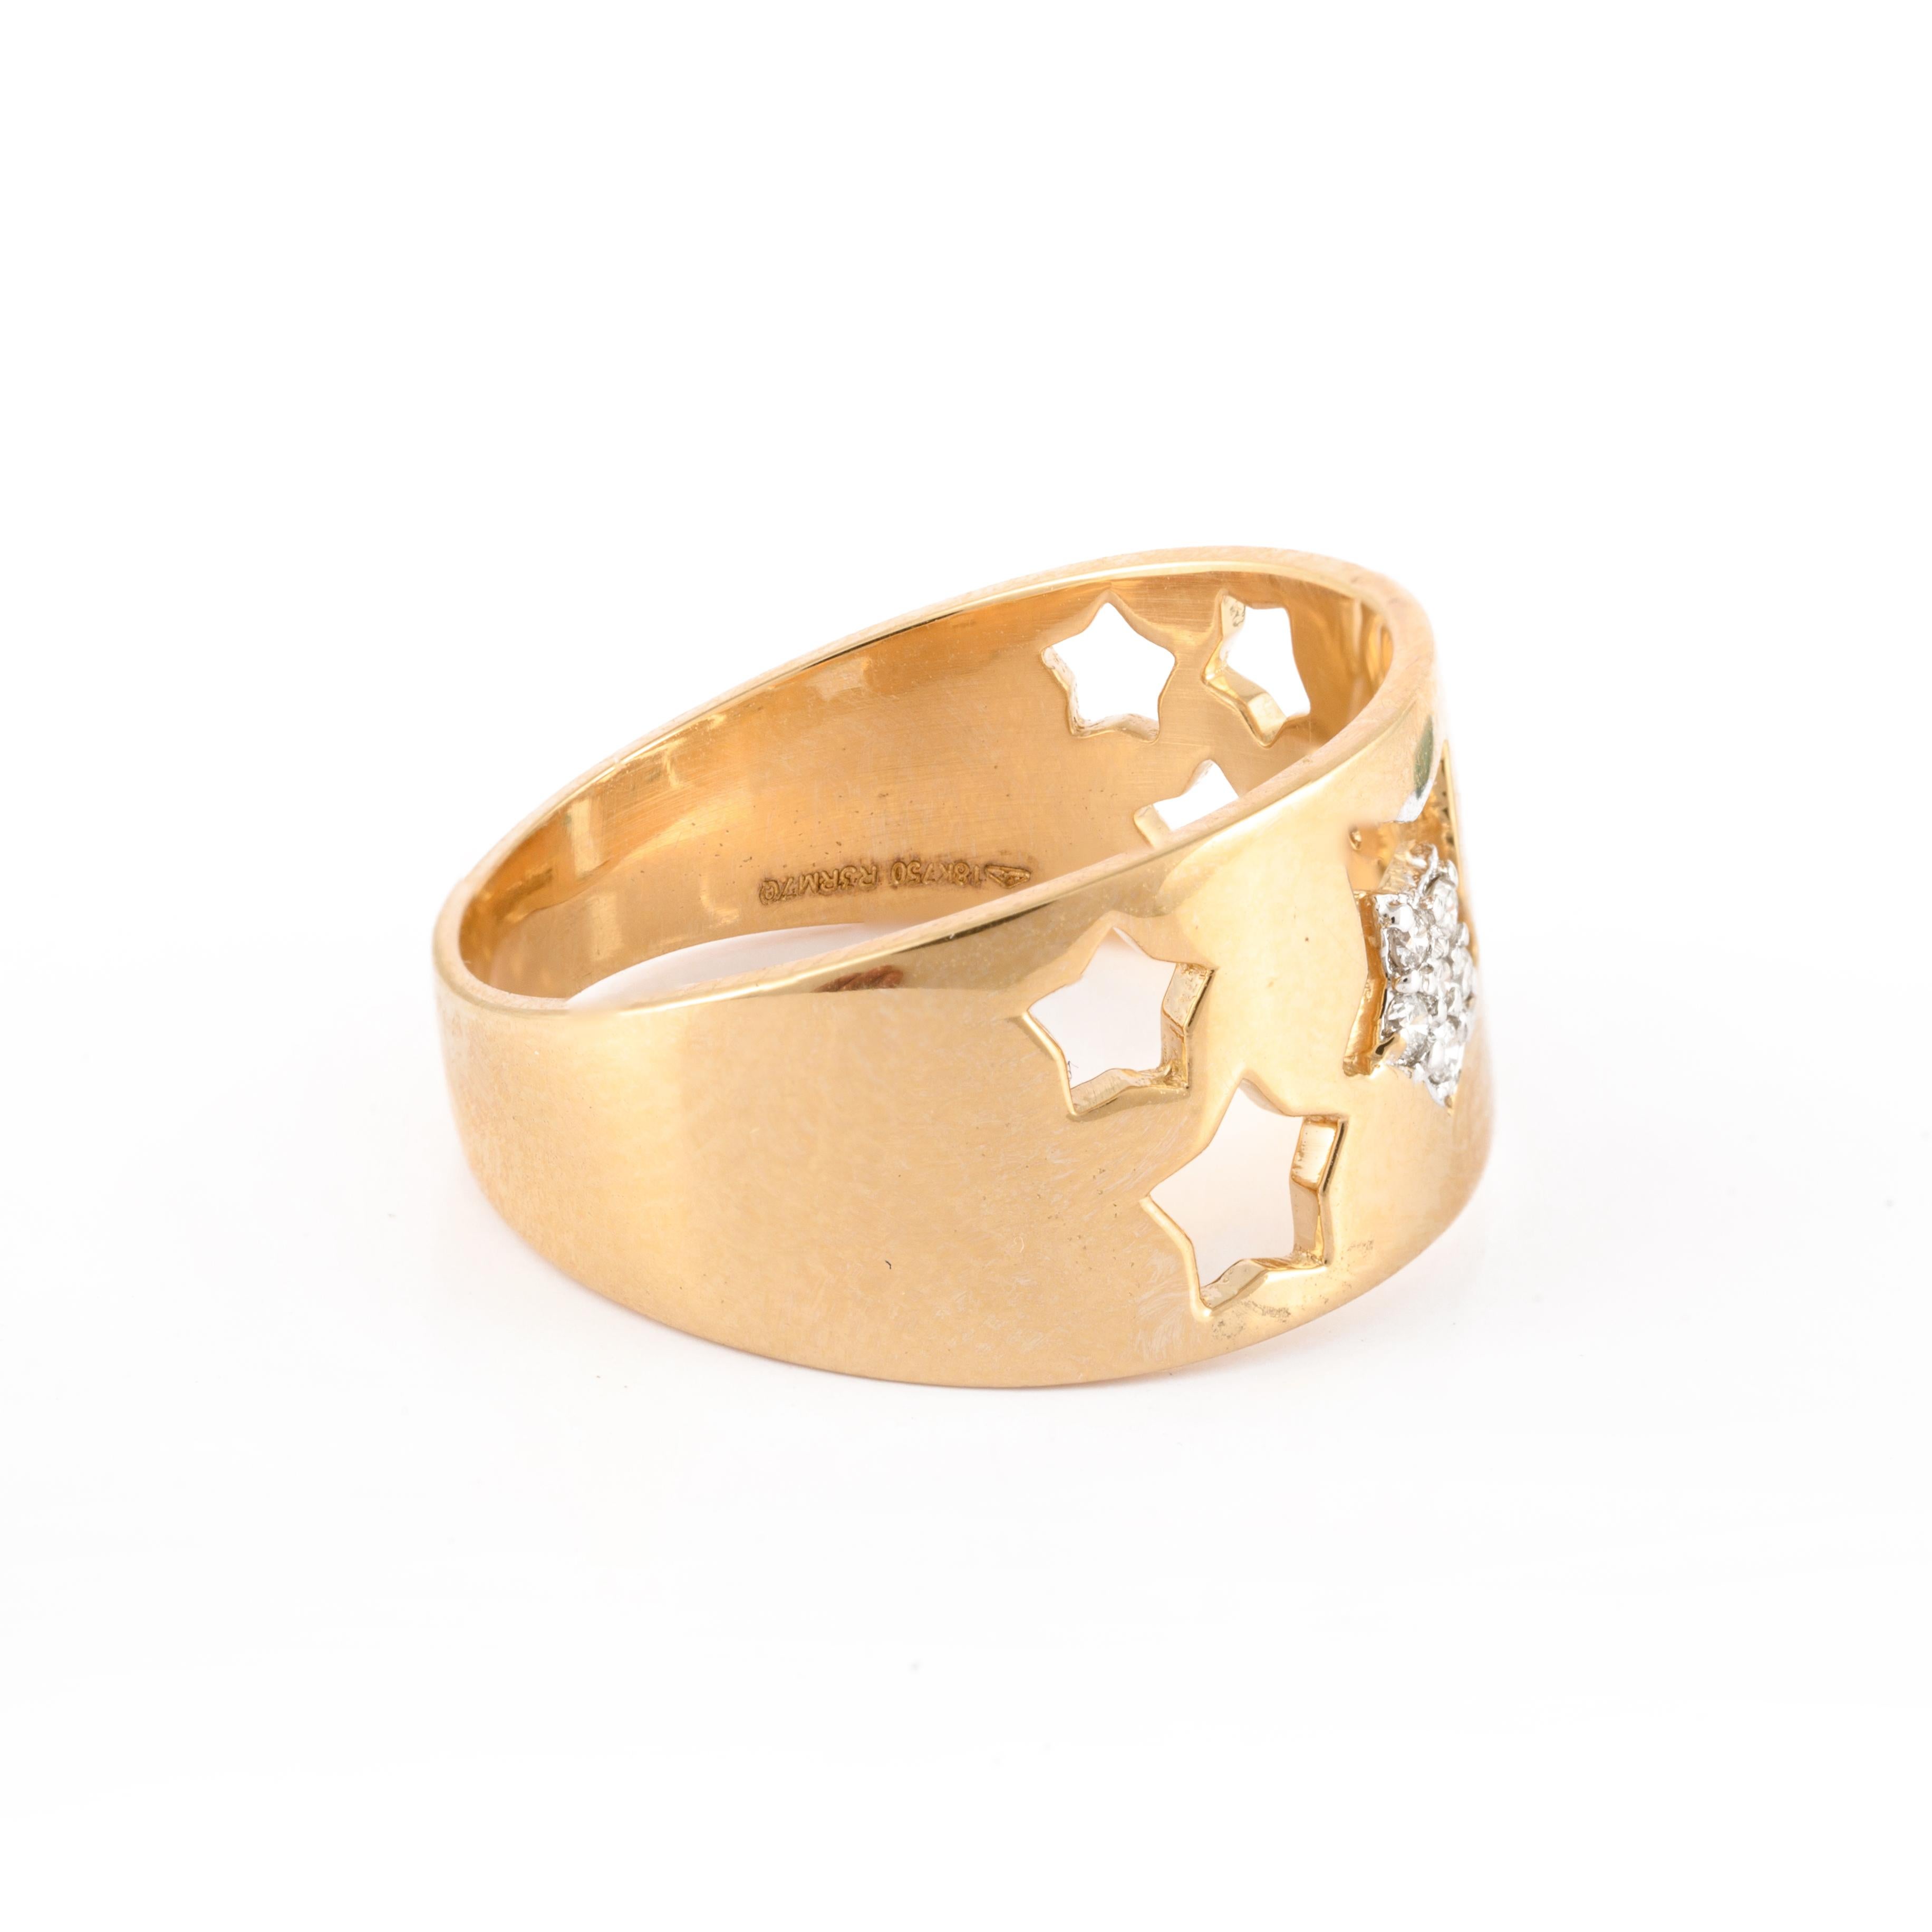 For Sale:  Star Cutout Genuine Diamond Band Ring 18 Karat Solid Yellow Gold Fine Jewelry 3